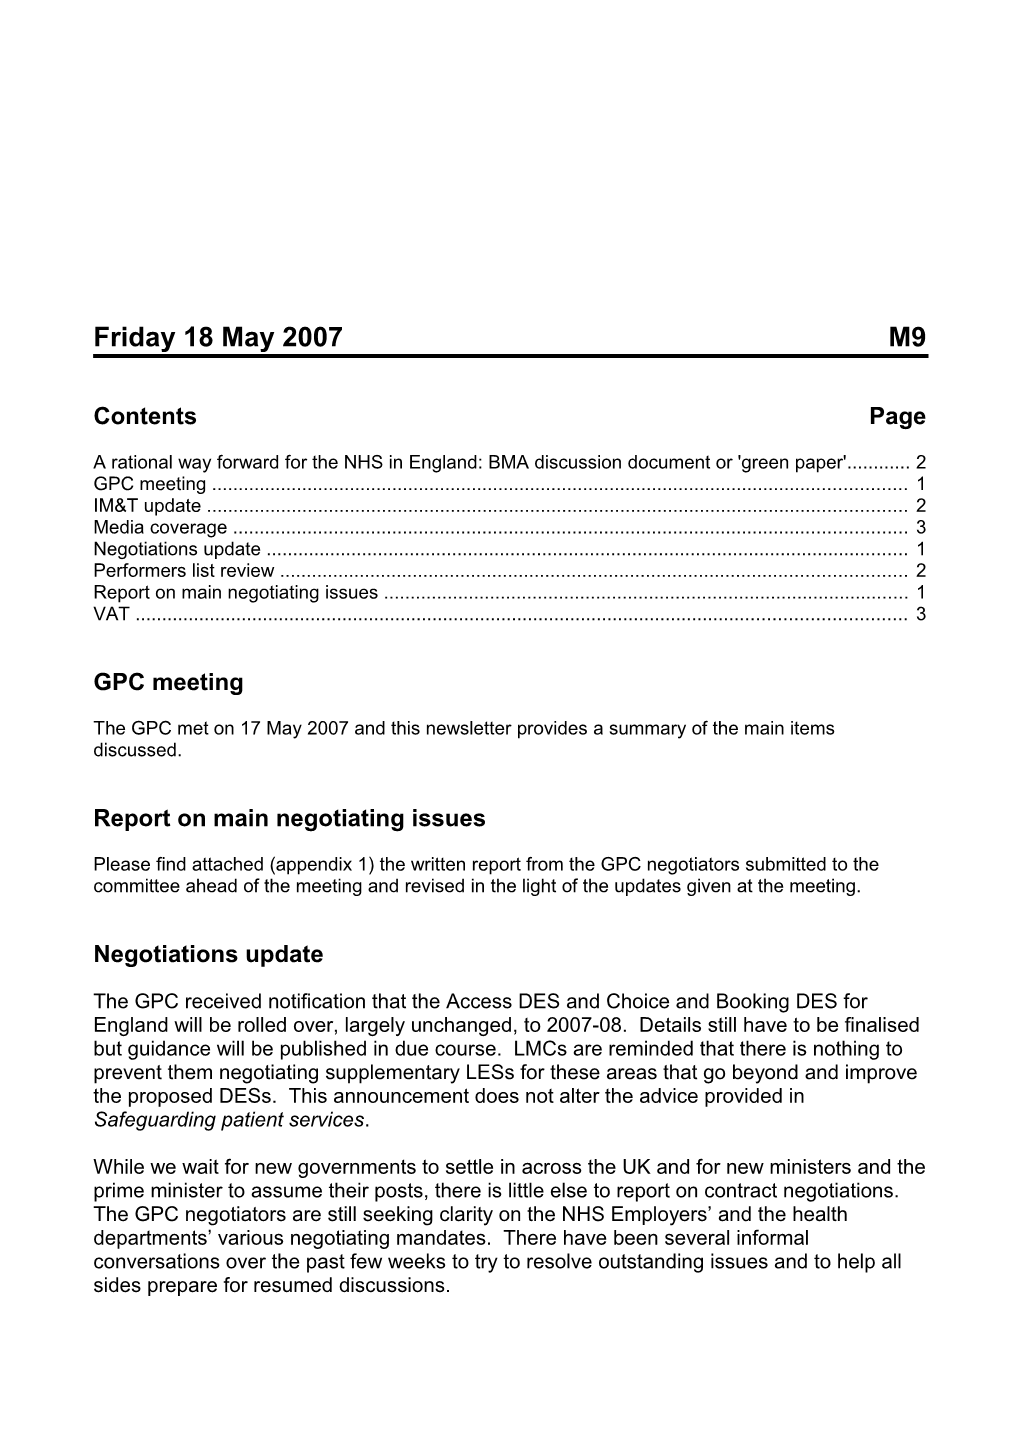 A Rational Way Forward for the NHS in England: BMA Discussion Document Or 'Green Paper' 2